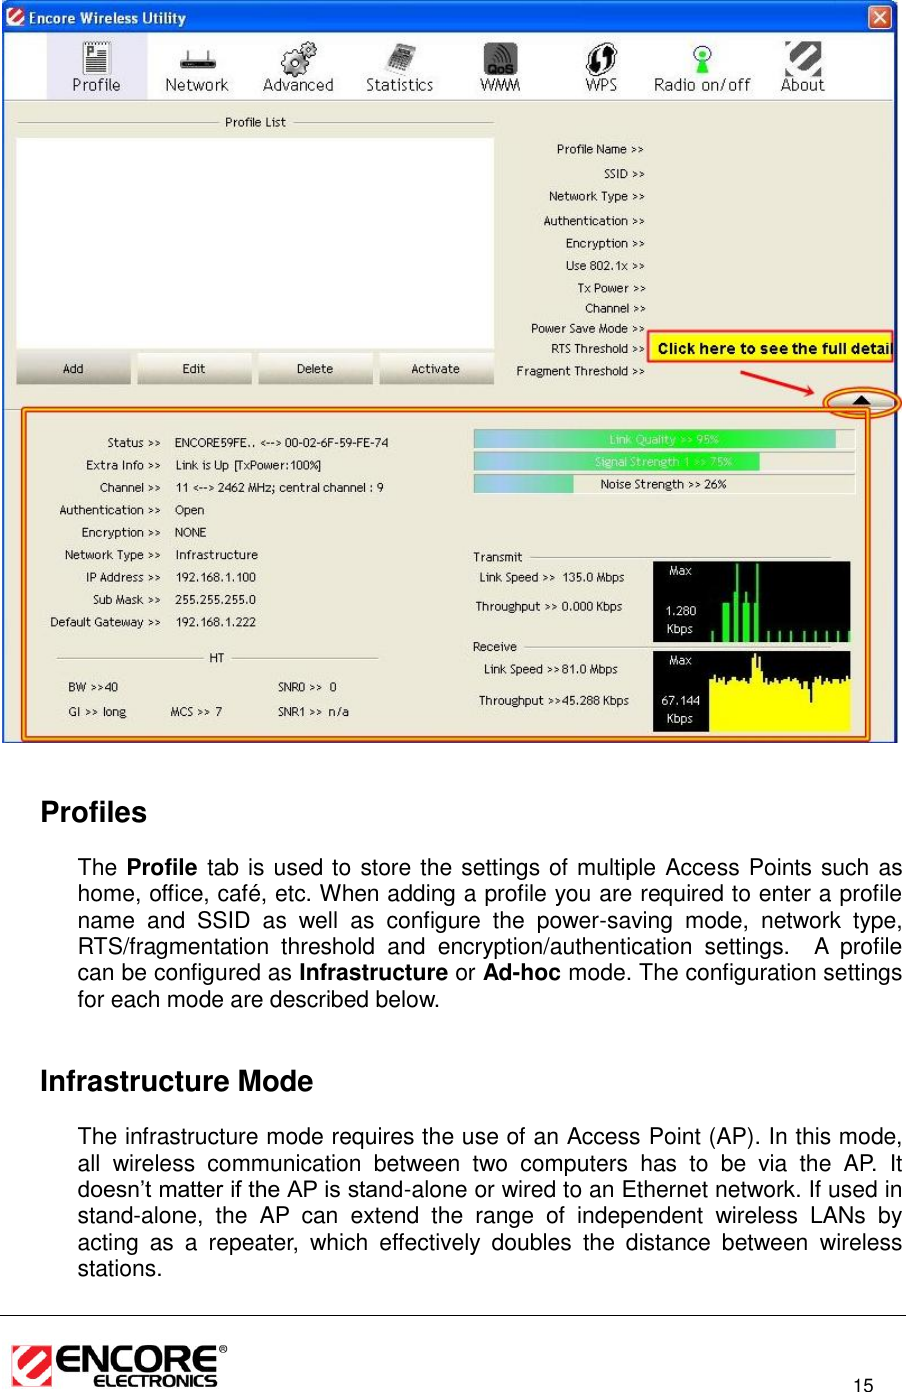                                                                                                                          15       Profiles The Profile tab is used to store the settings of multiple Access Points such as home, office, café, etc. When adding a profile you are required to enter a profile name  and  SSID  as  well  as  configure  the  power-saving  mode,  network  type, RTS/fragmentation  threshold  and  encryption/authentication  settings.    A  profile can be configured as Infrastructure or Ad-hoc mode. The configuration settings for each mode are described below.      Infrastructure Mode The infrastructure mode requires the use of an Access Point (AP). In this mode, all  wireless  communication  between  two  computers  has  to  be  via  the  AP.  It doesn’t matter if the AP is stand-alone or wired to an Ethernet network. If used in stand-alone,  the  AP  can  extend  the  range  of  independent  wireless  LANs  by acting  as  a  repeater,  which  effectively  doubles  the  distance  between  wireless stations.  